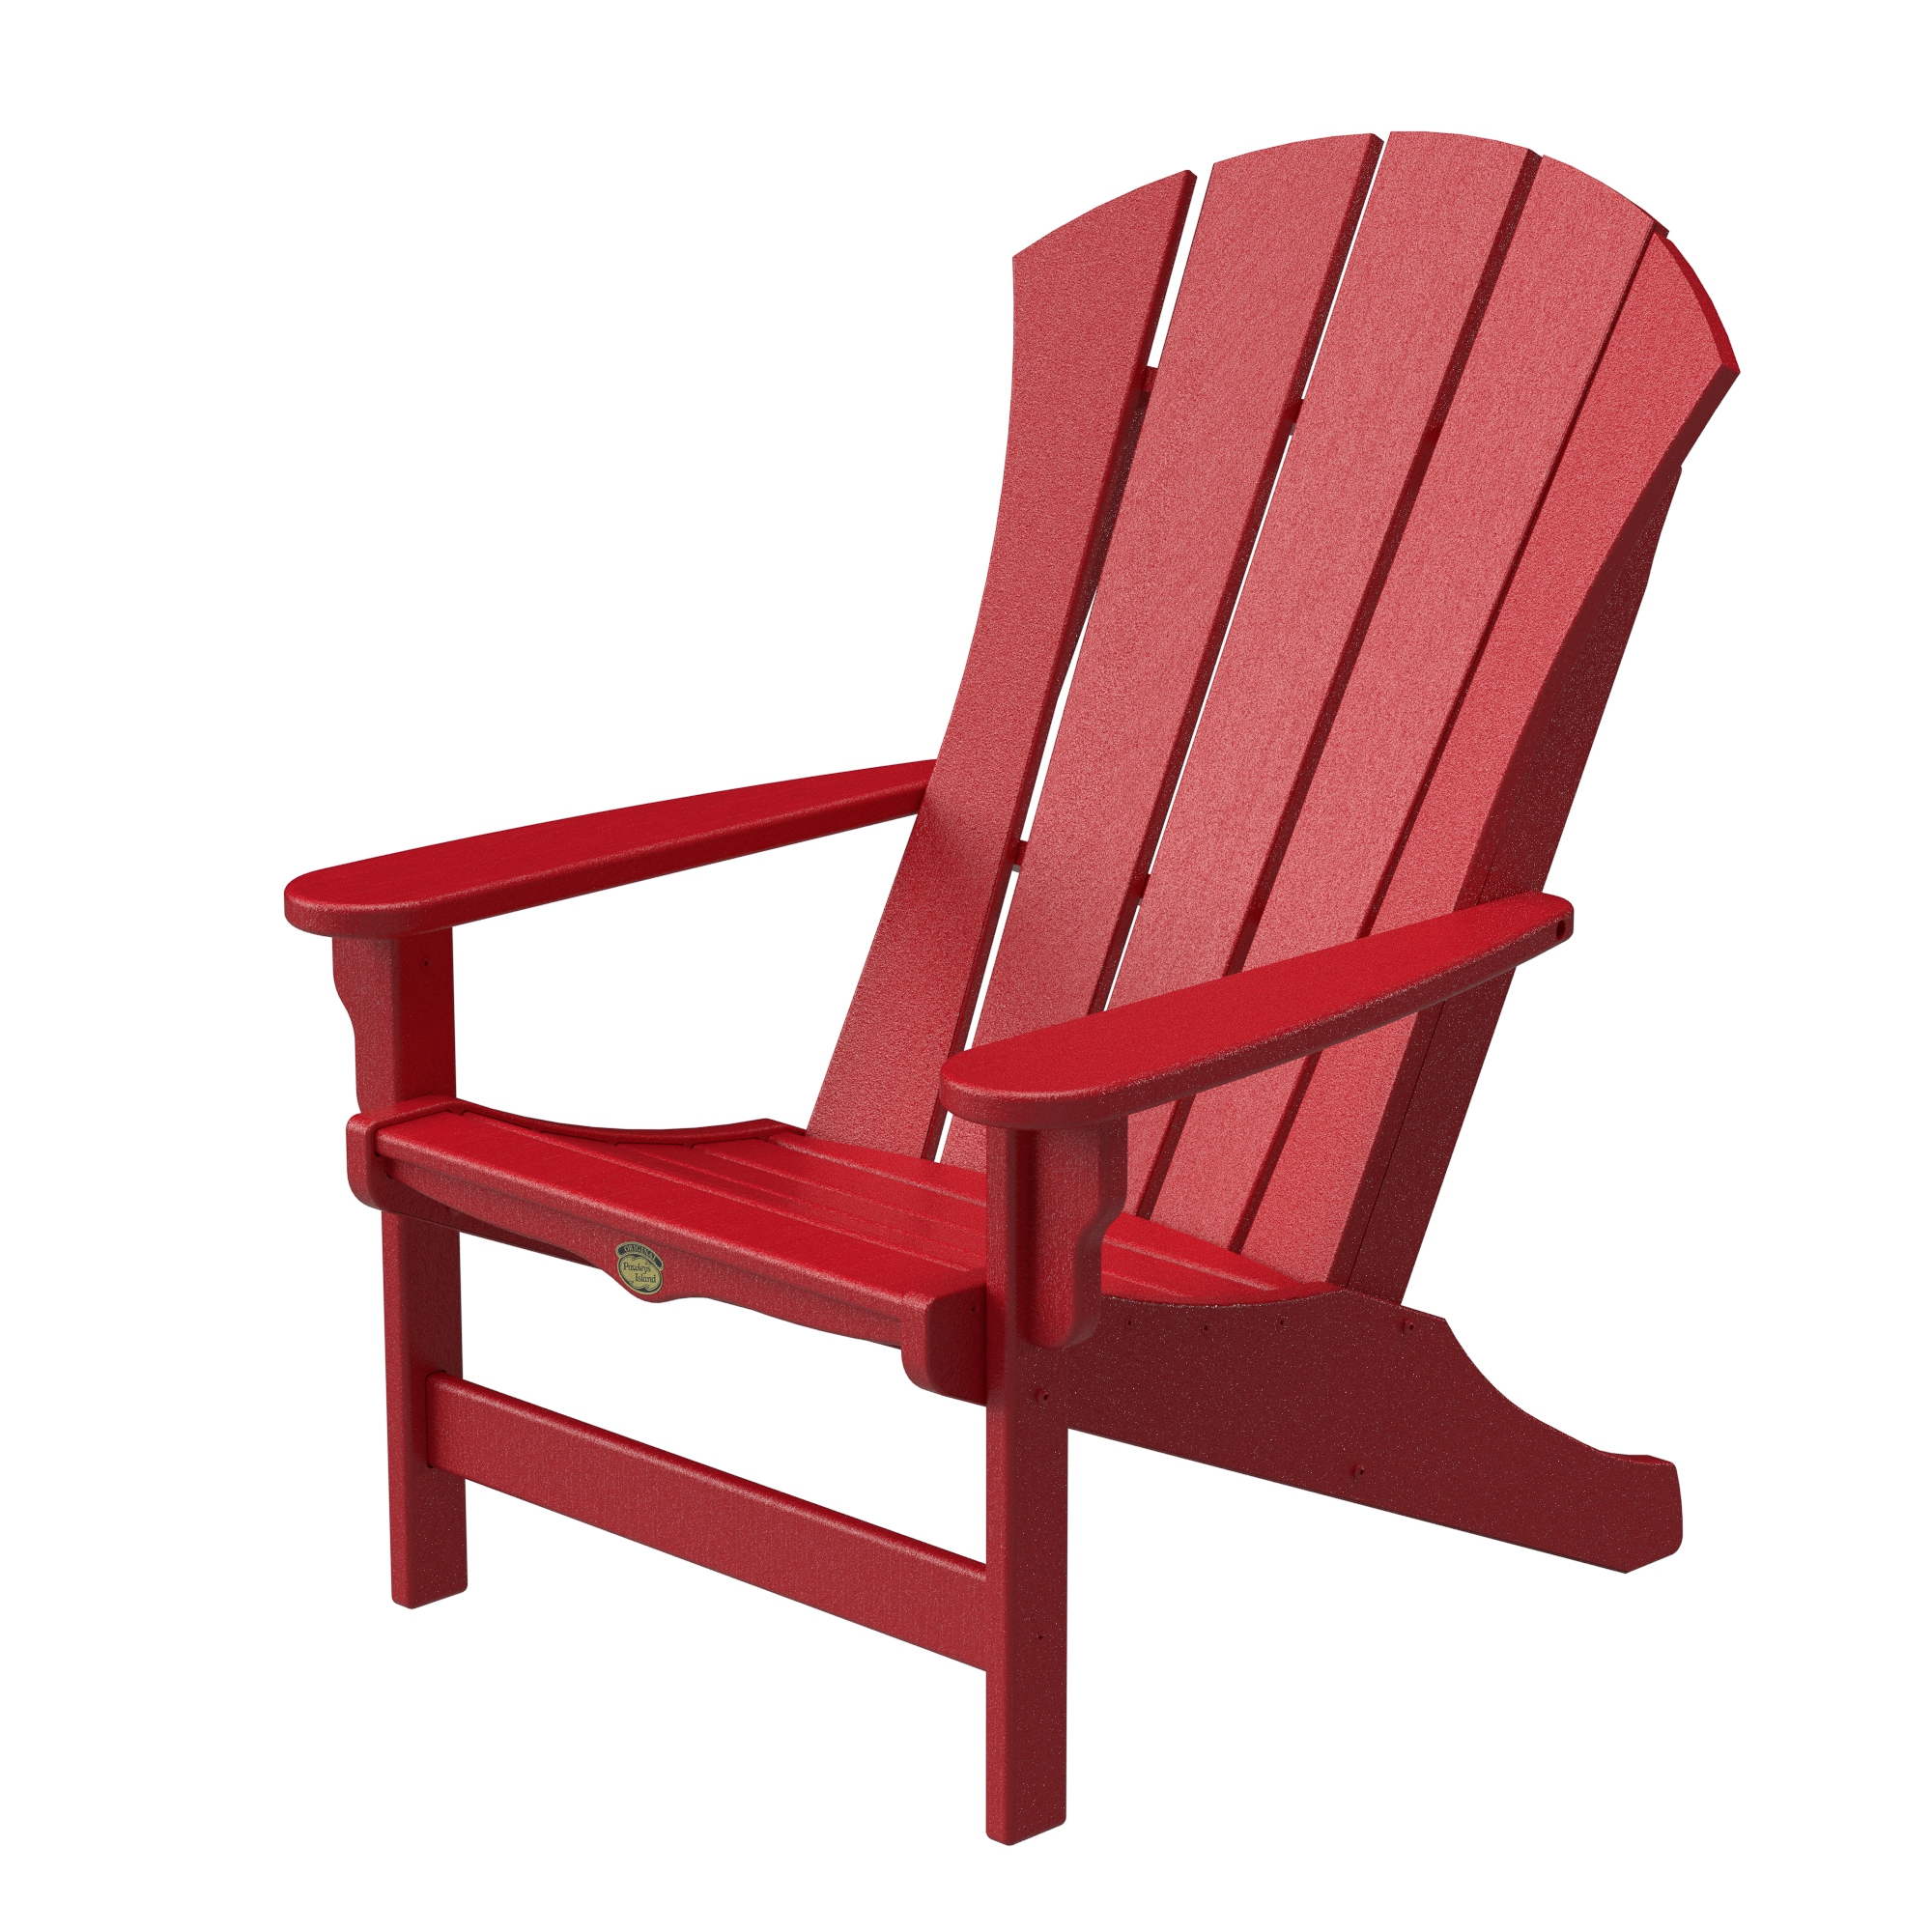 Red Stain For Wood: Transform Your Furniture Aesthetics!